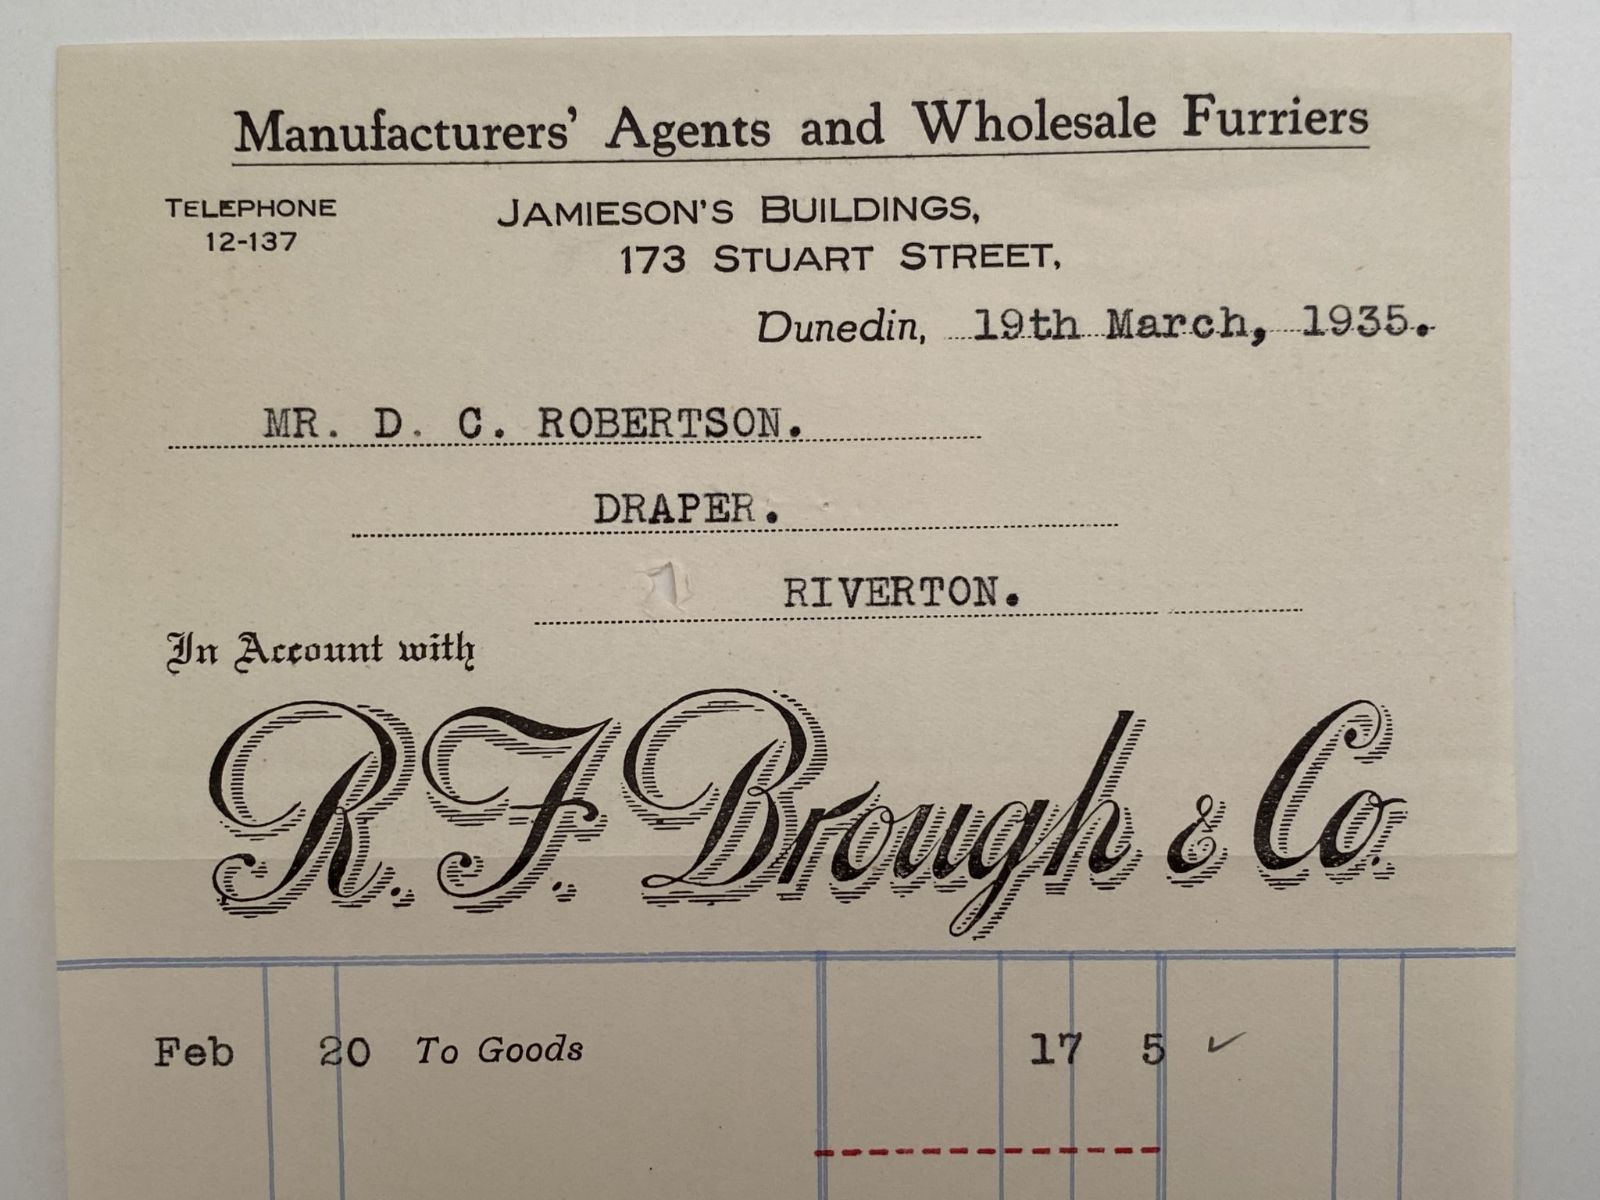 OLD INVOICE: R. J. Brough & Co. Dunedin - Manufacturers' Agents & Furriers 1935